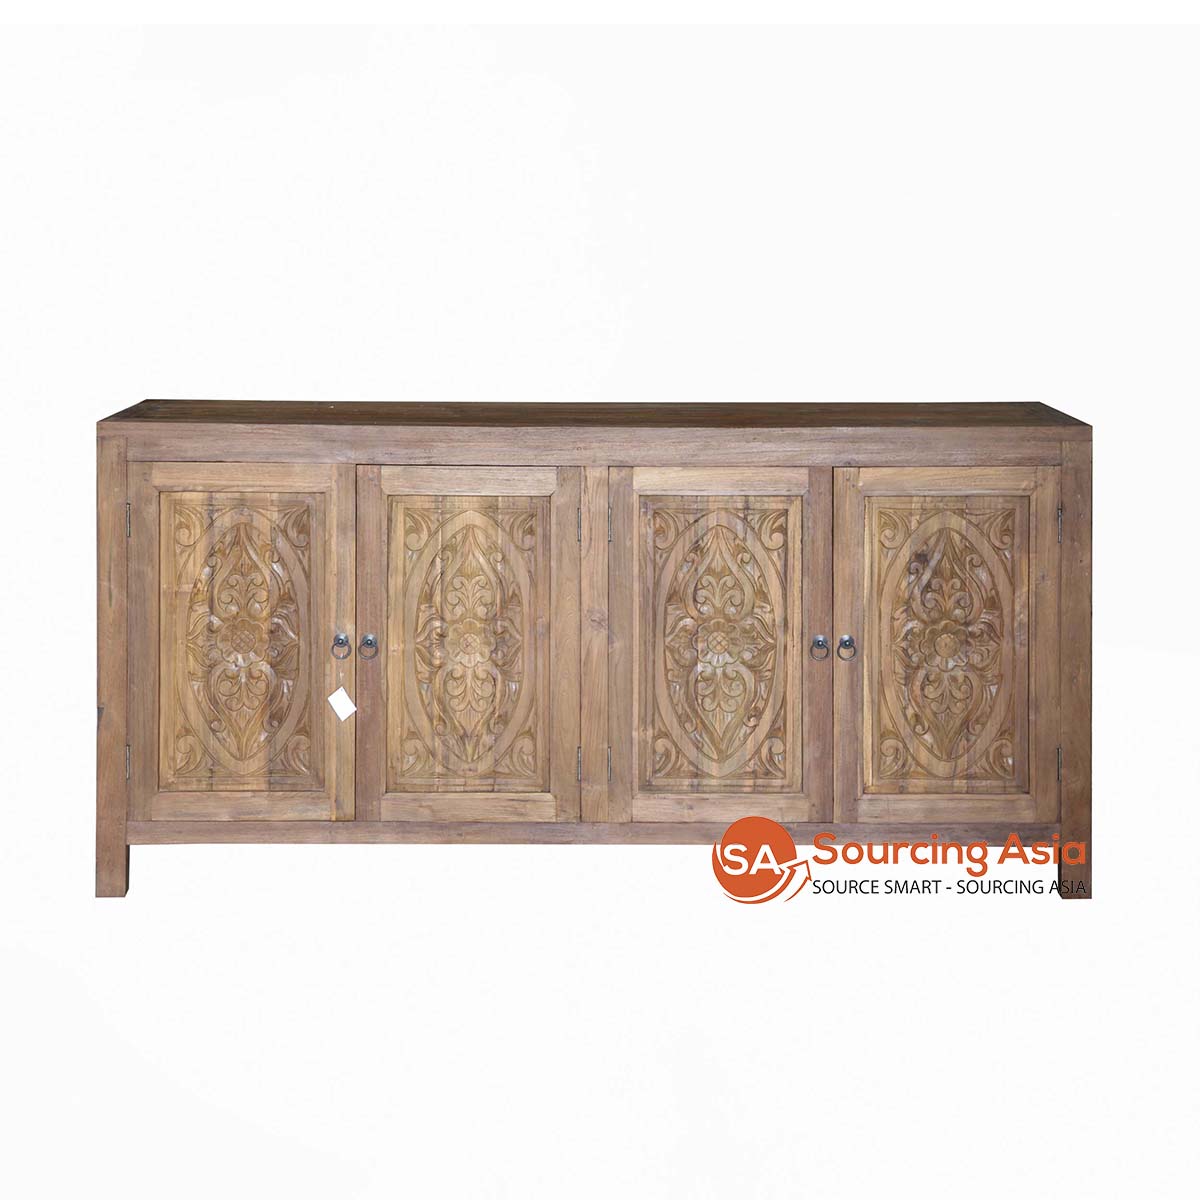 LAC082 BUFFET WITH 4 CARVED DOORS